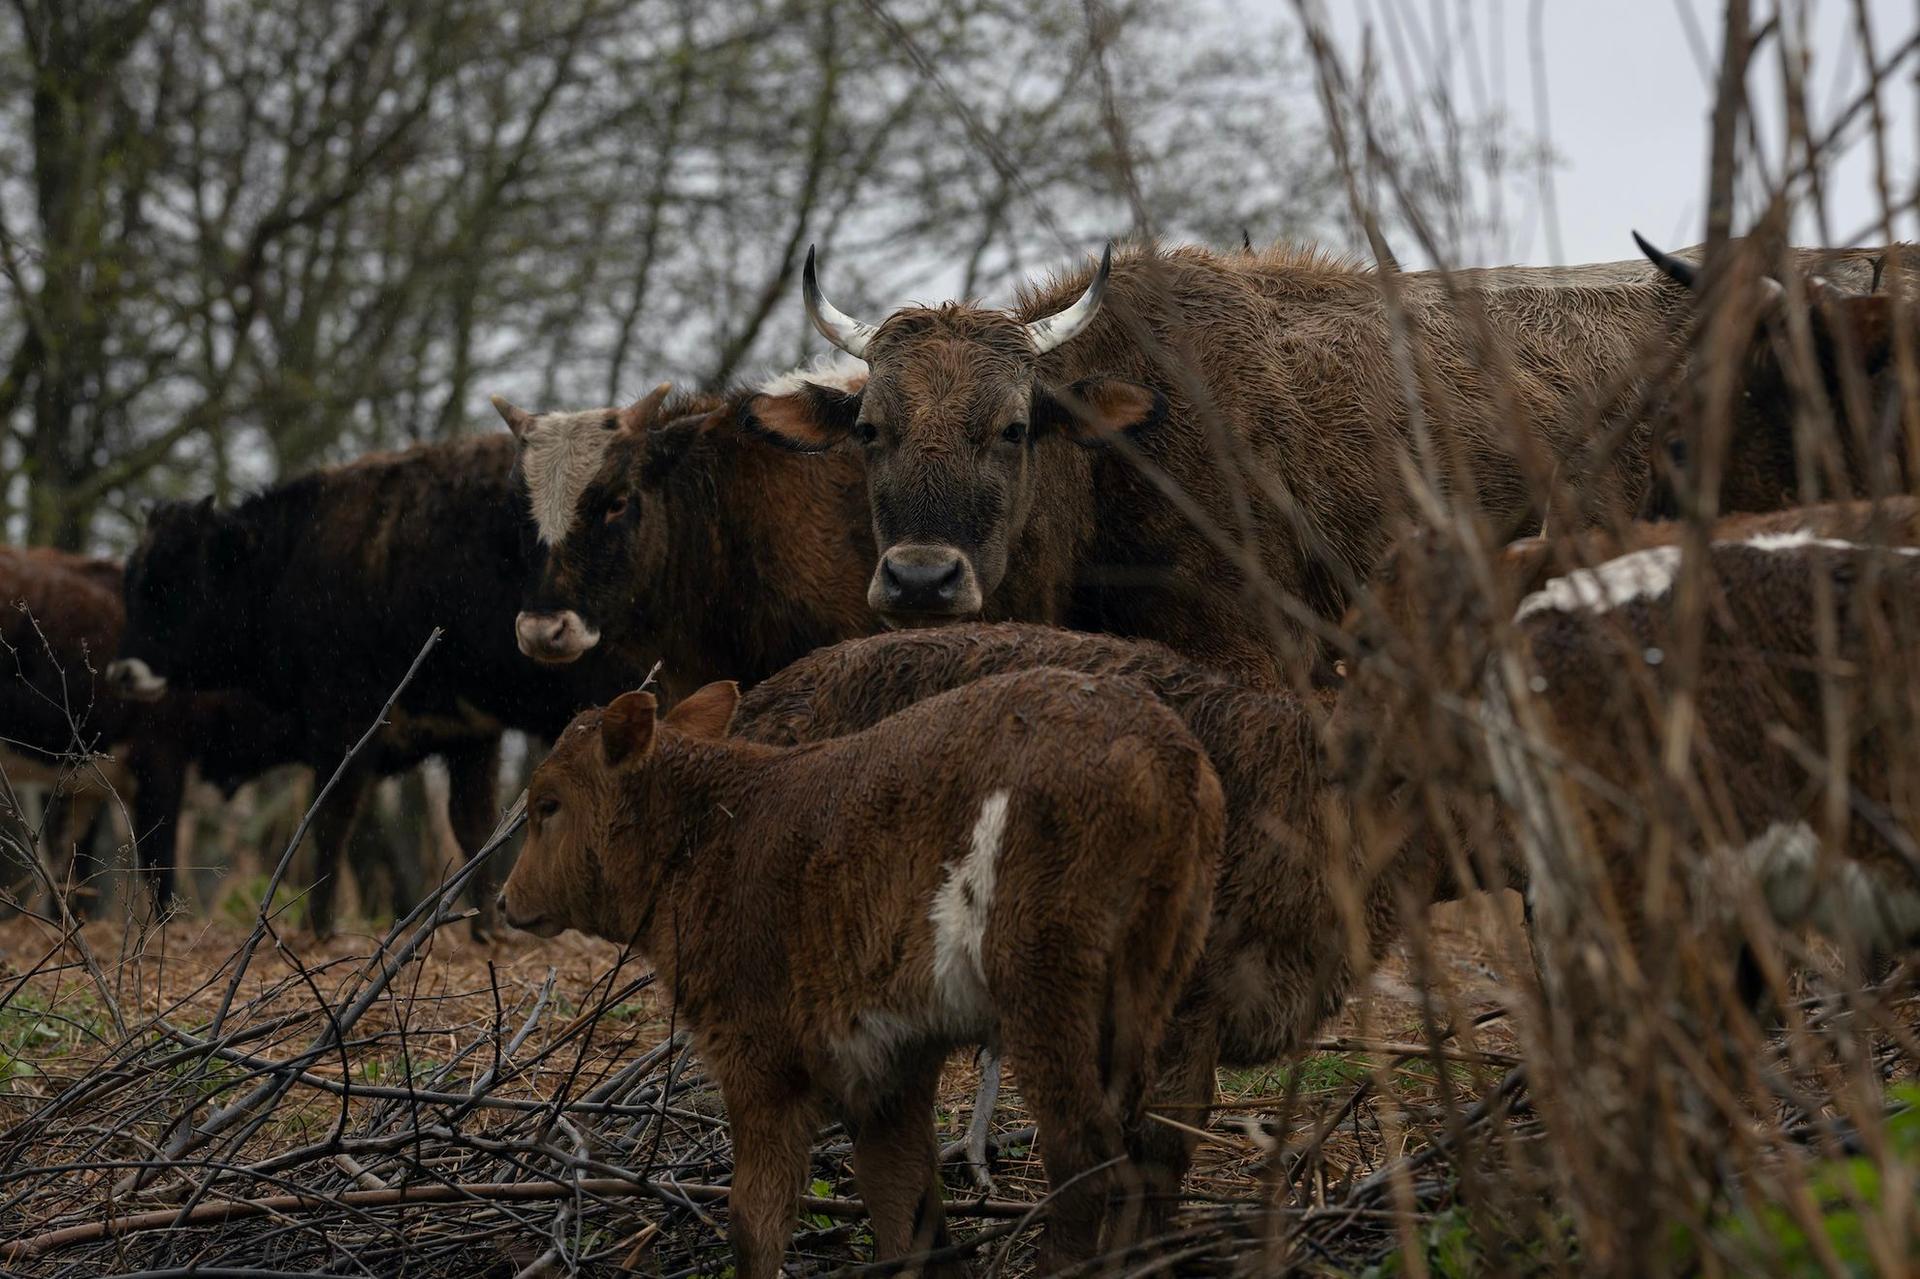 In the Danube delta, animals graze freely on land that farmers rent from the municipality. Photo: Andreea Câmpeanu